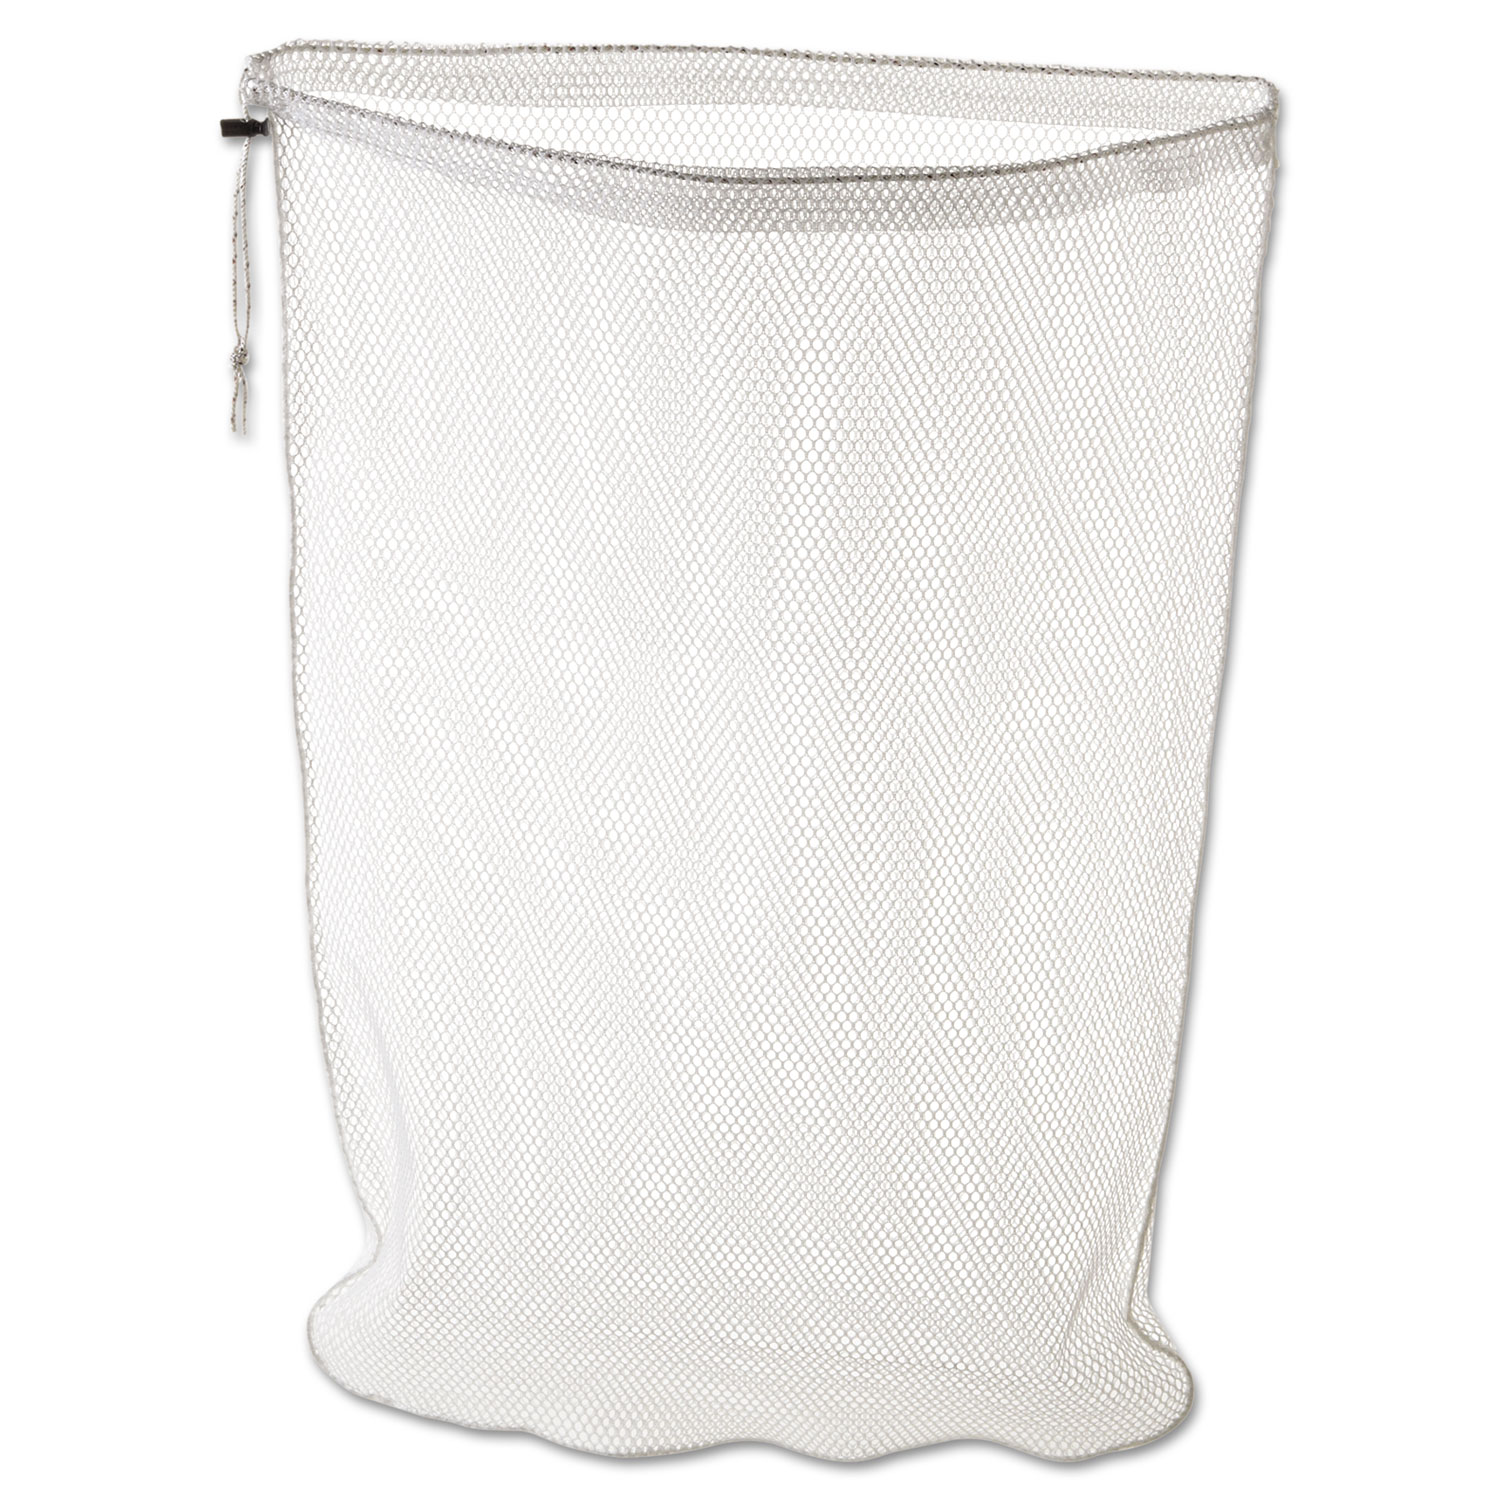  Rubbermaid Commercial FGU21000WH00 Laundry Net, Synthetic Fabric, 24w x 24d x 36h, White (RCPU210) 